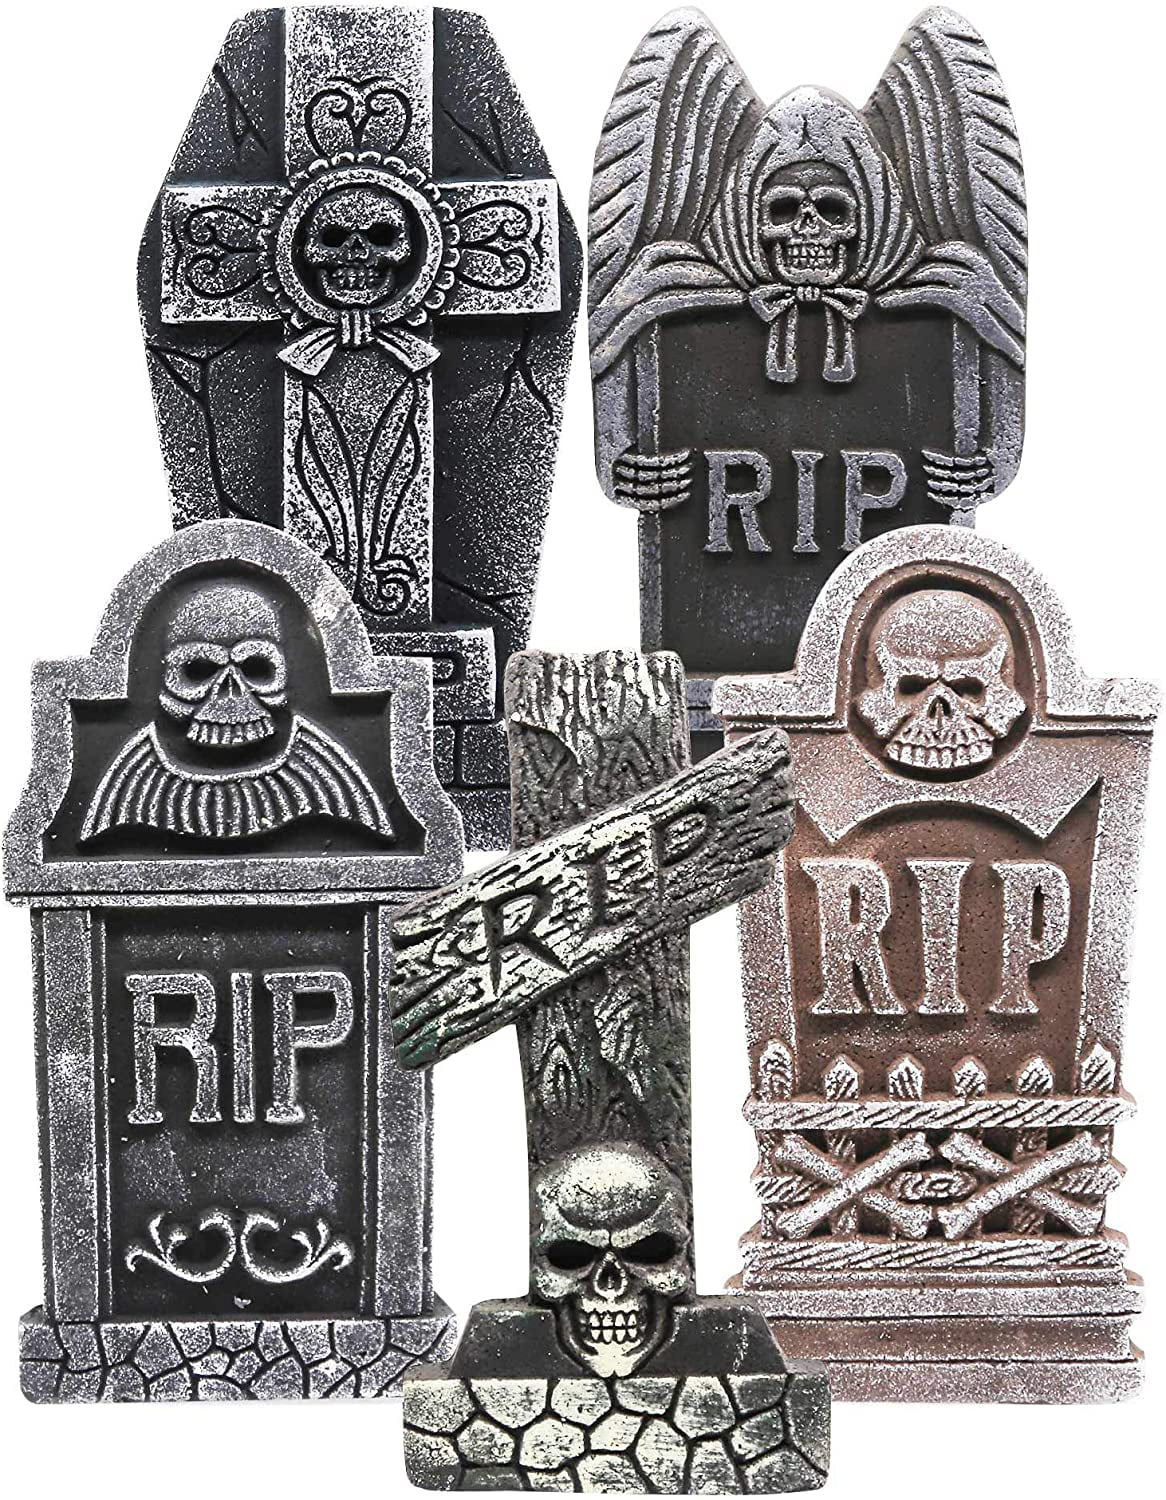 Halloween Decorations! Three slate tombstones for crafts Our historic stone shipped to your door for Halloween fun! decorations painting